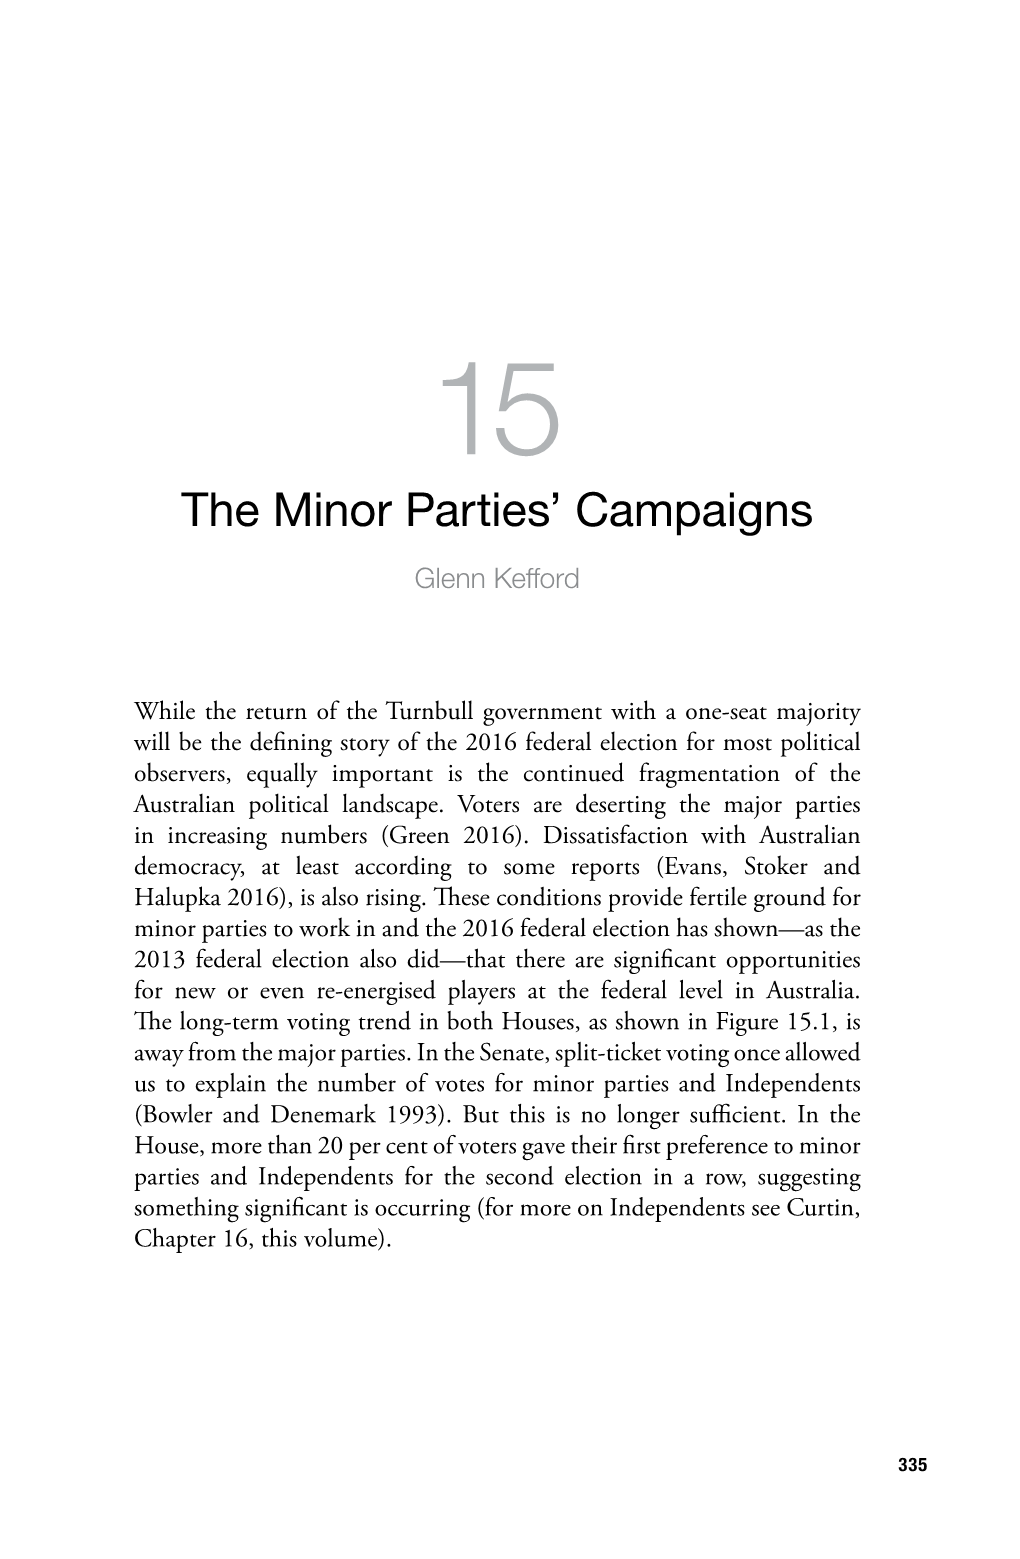 The Minor Parties' Campaigns